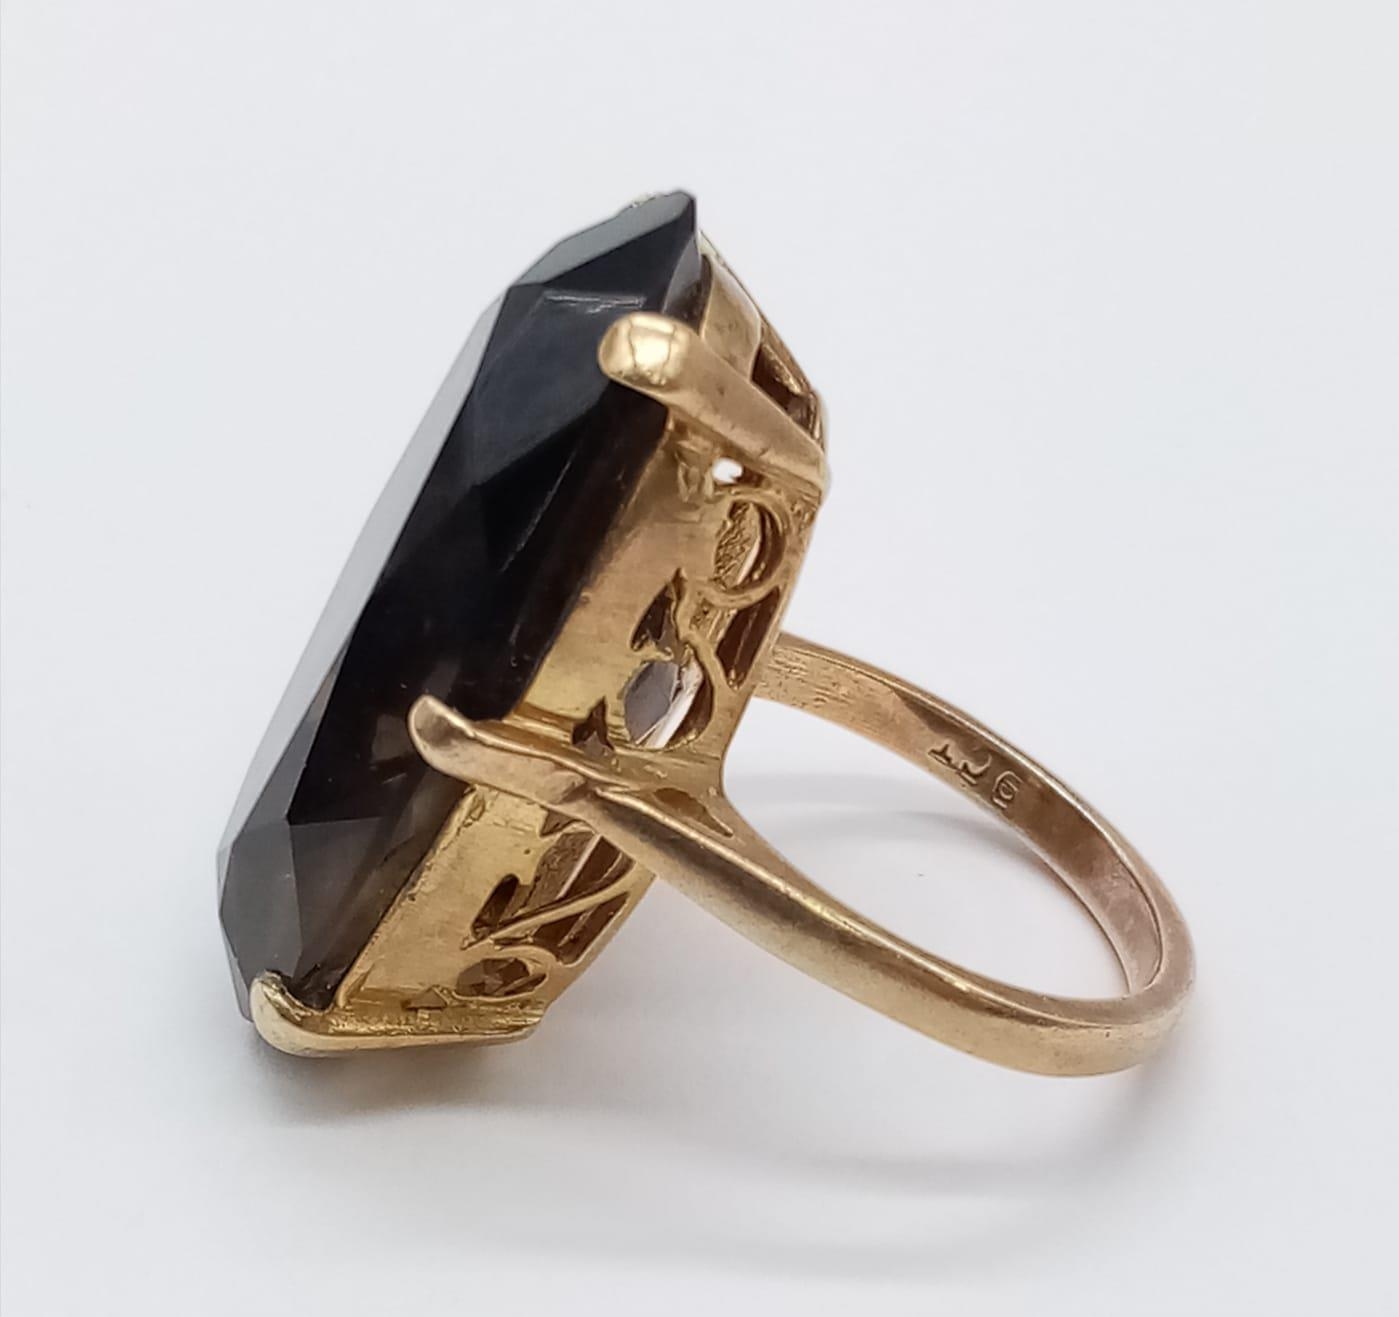 9ct vintage ring with large smoky quartz, size U and weight 8.75g - Image 3 of 5